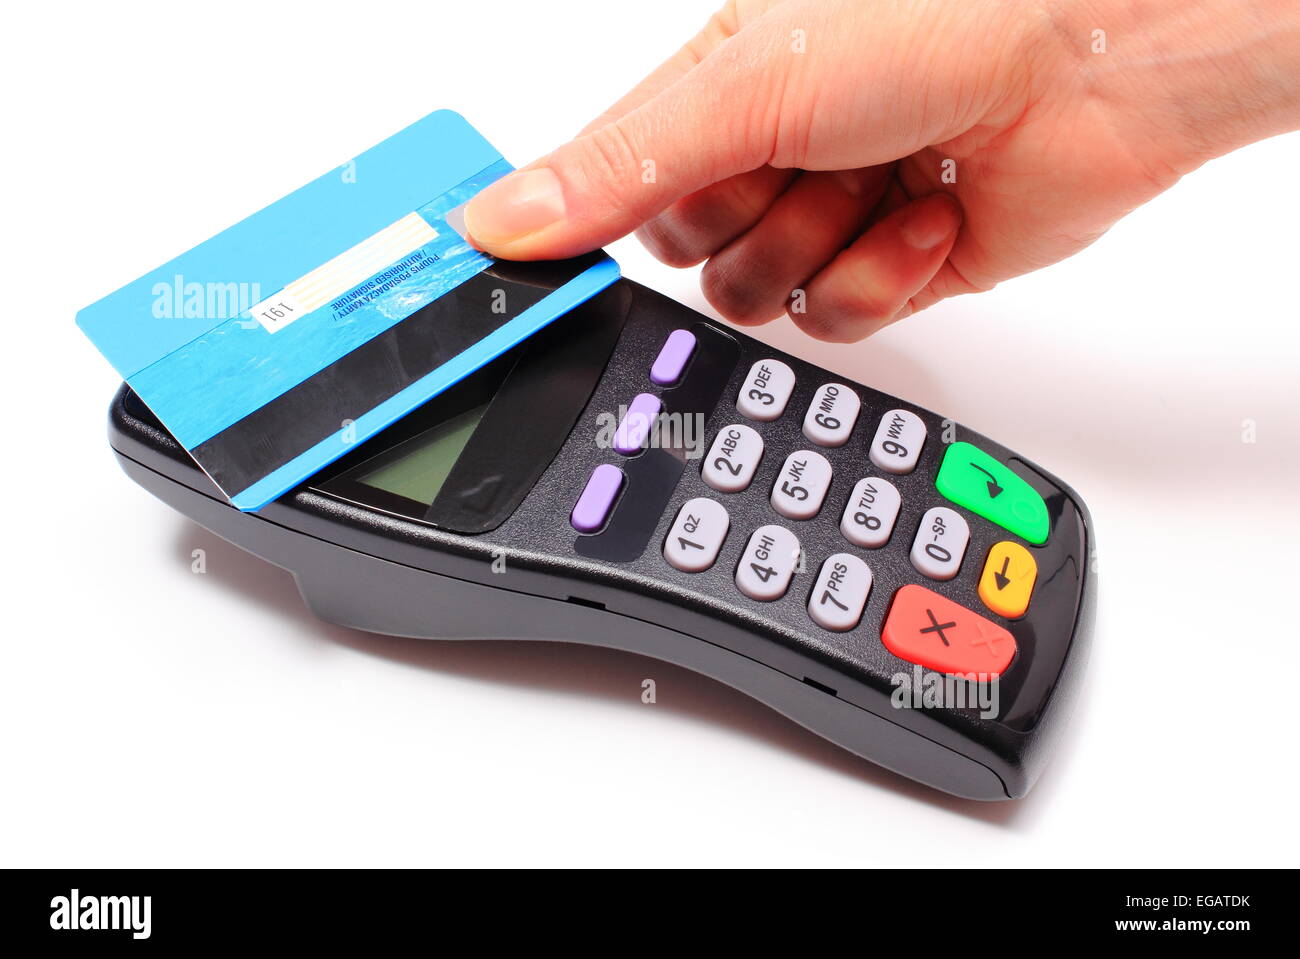 Hand of woman paying with contactless credit card with NFC technology, credit card reader, payment terminal, finance concept Stock Photo